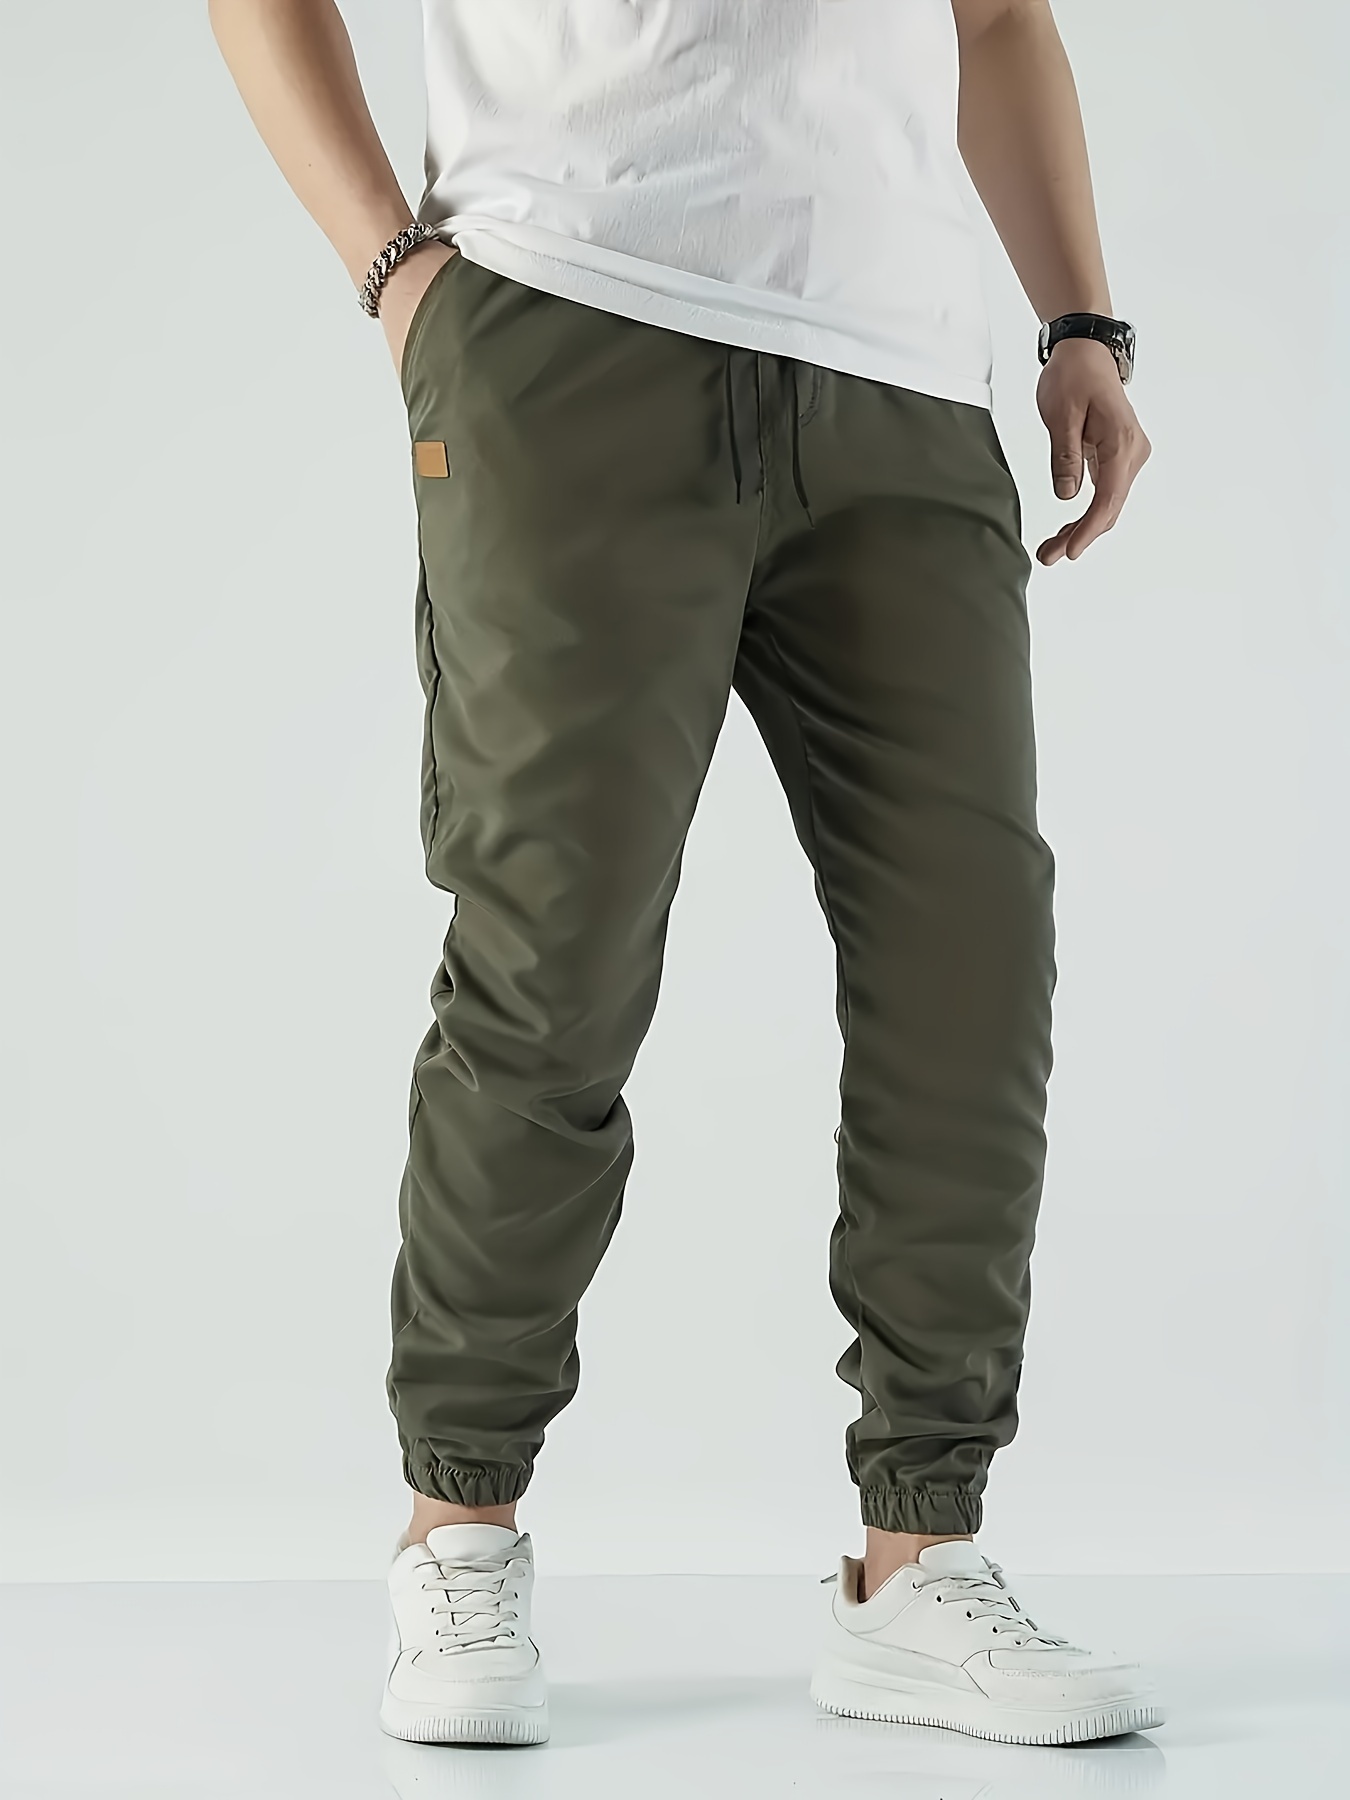 Olive Green Joggers For Fall  Fashion joggers, Joggers outfit